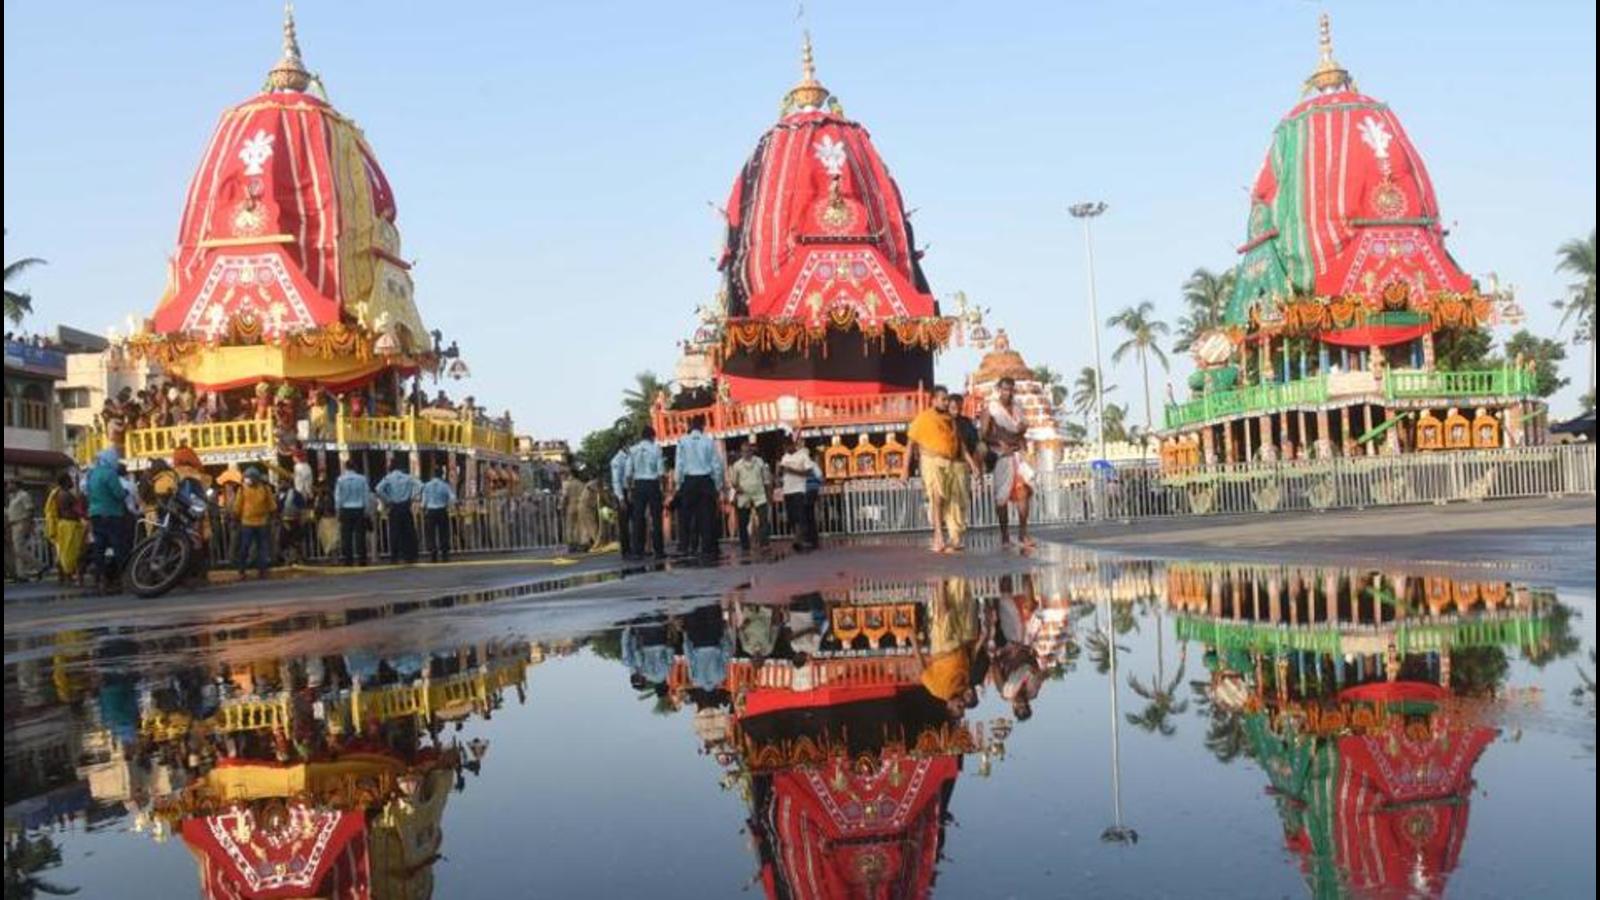 For 2nd year in a row, Lord Jagannath's Rath Yatra in Puri to be held  without devotees | Latest News India - Hindustan Times